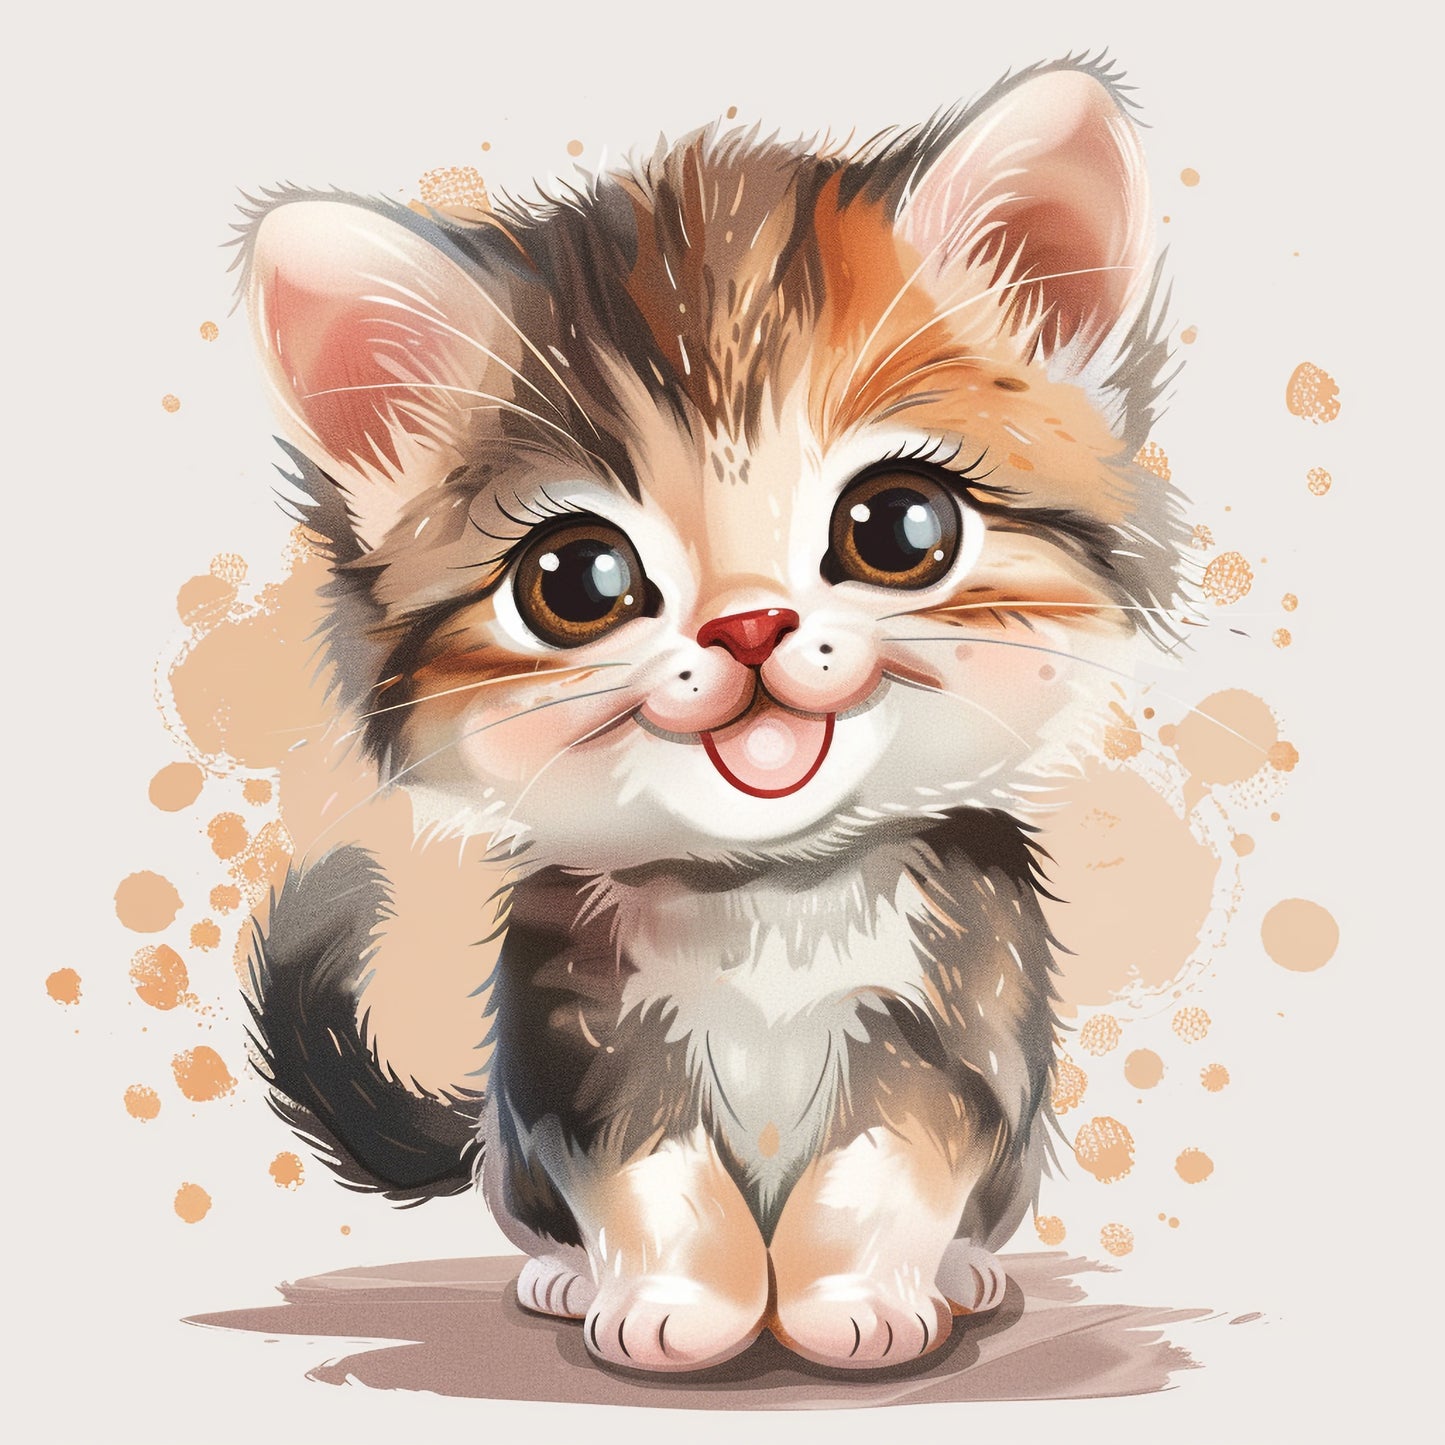 Adorable Smiling Kitten Illustration With Splashes of Color